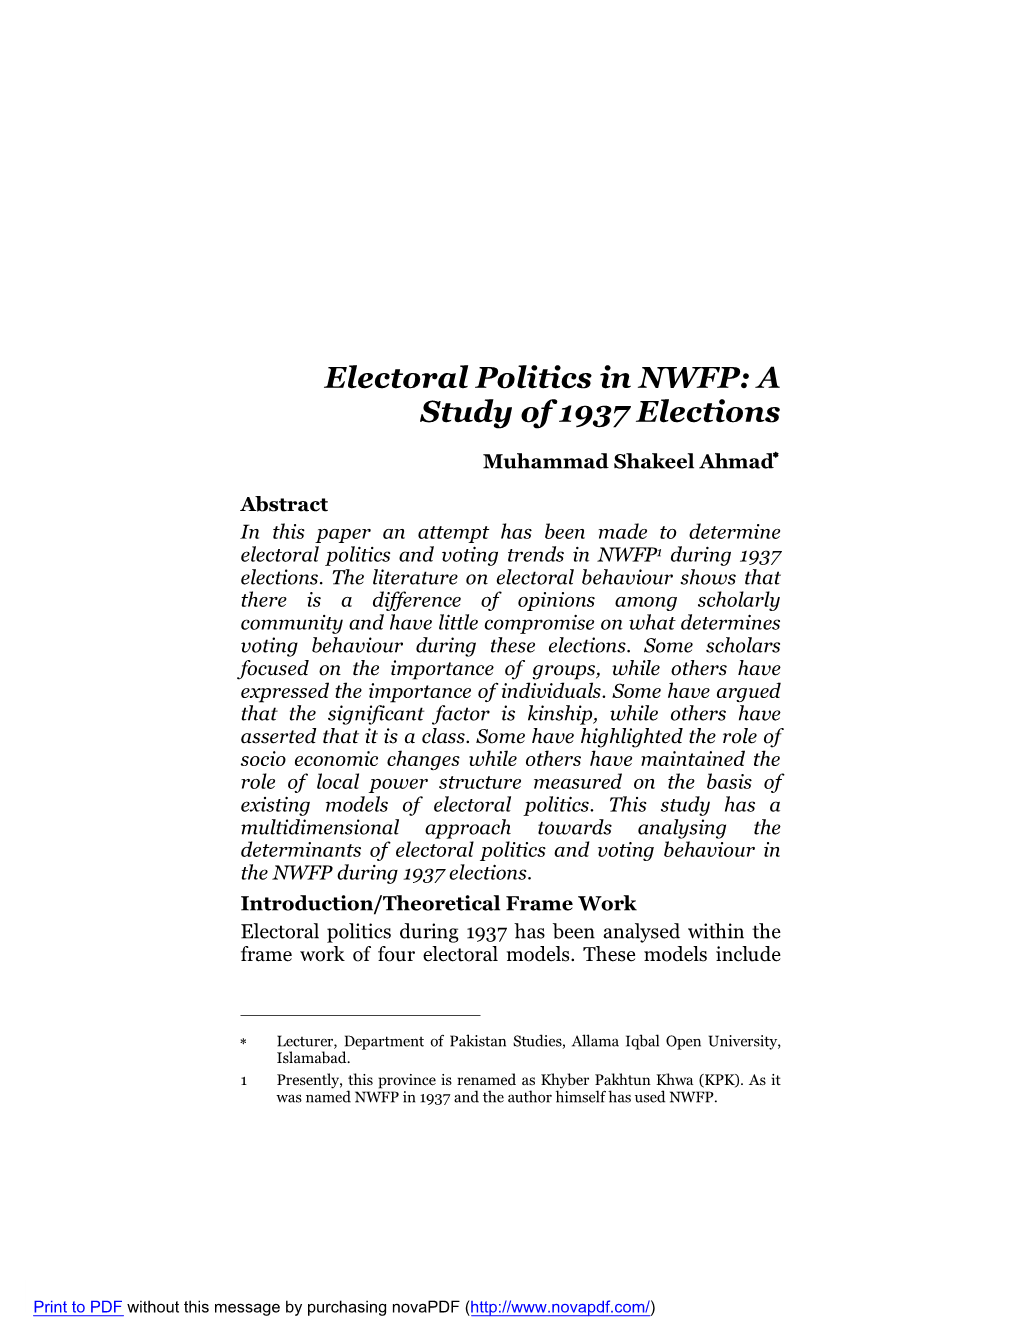 Electoral Politics in NWFP: a Study of 1937 Elections